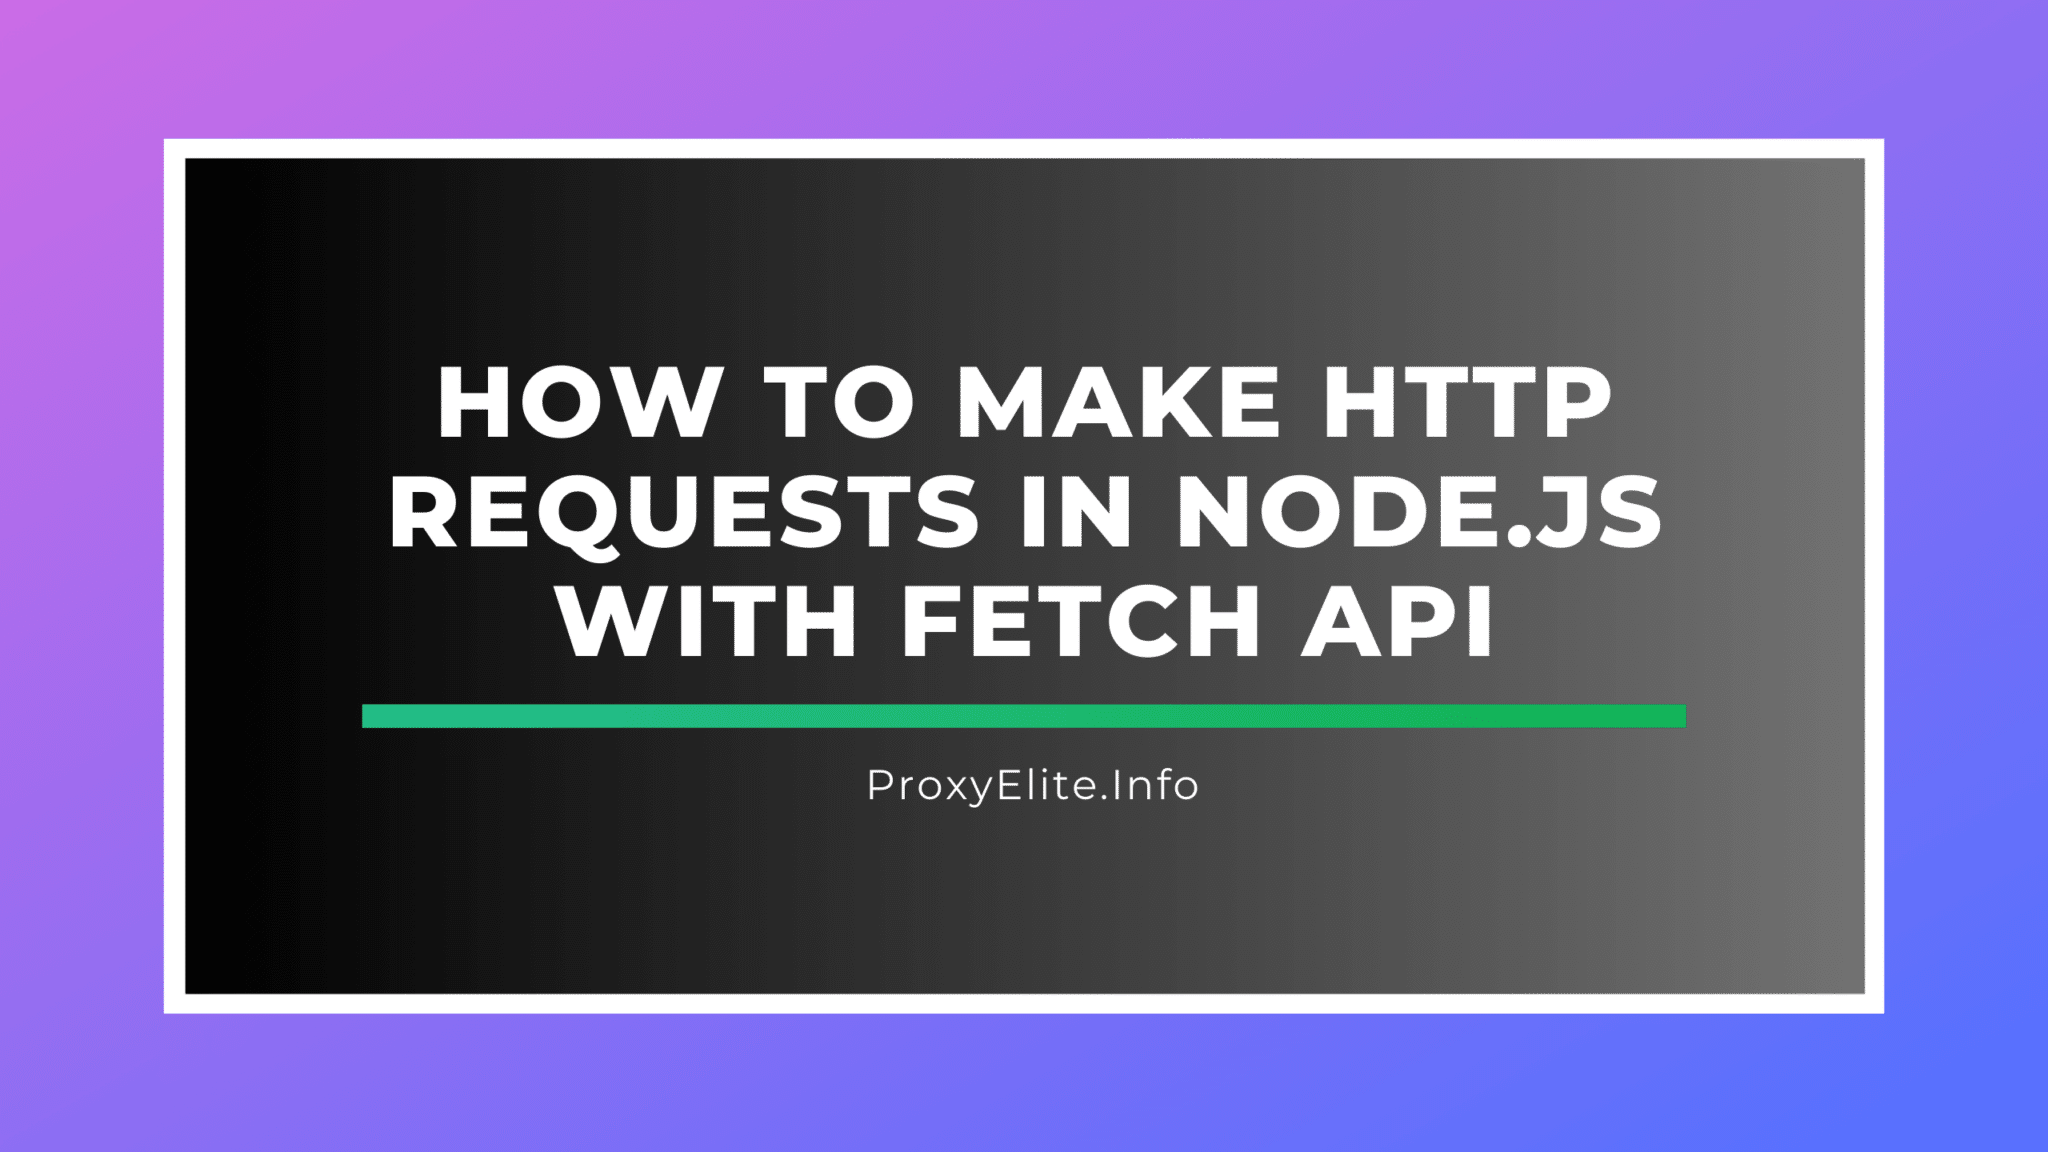 How to Make HTTP Requests in Node.js With Fetch API